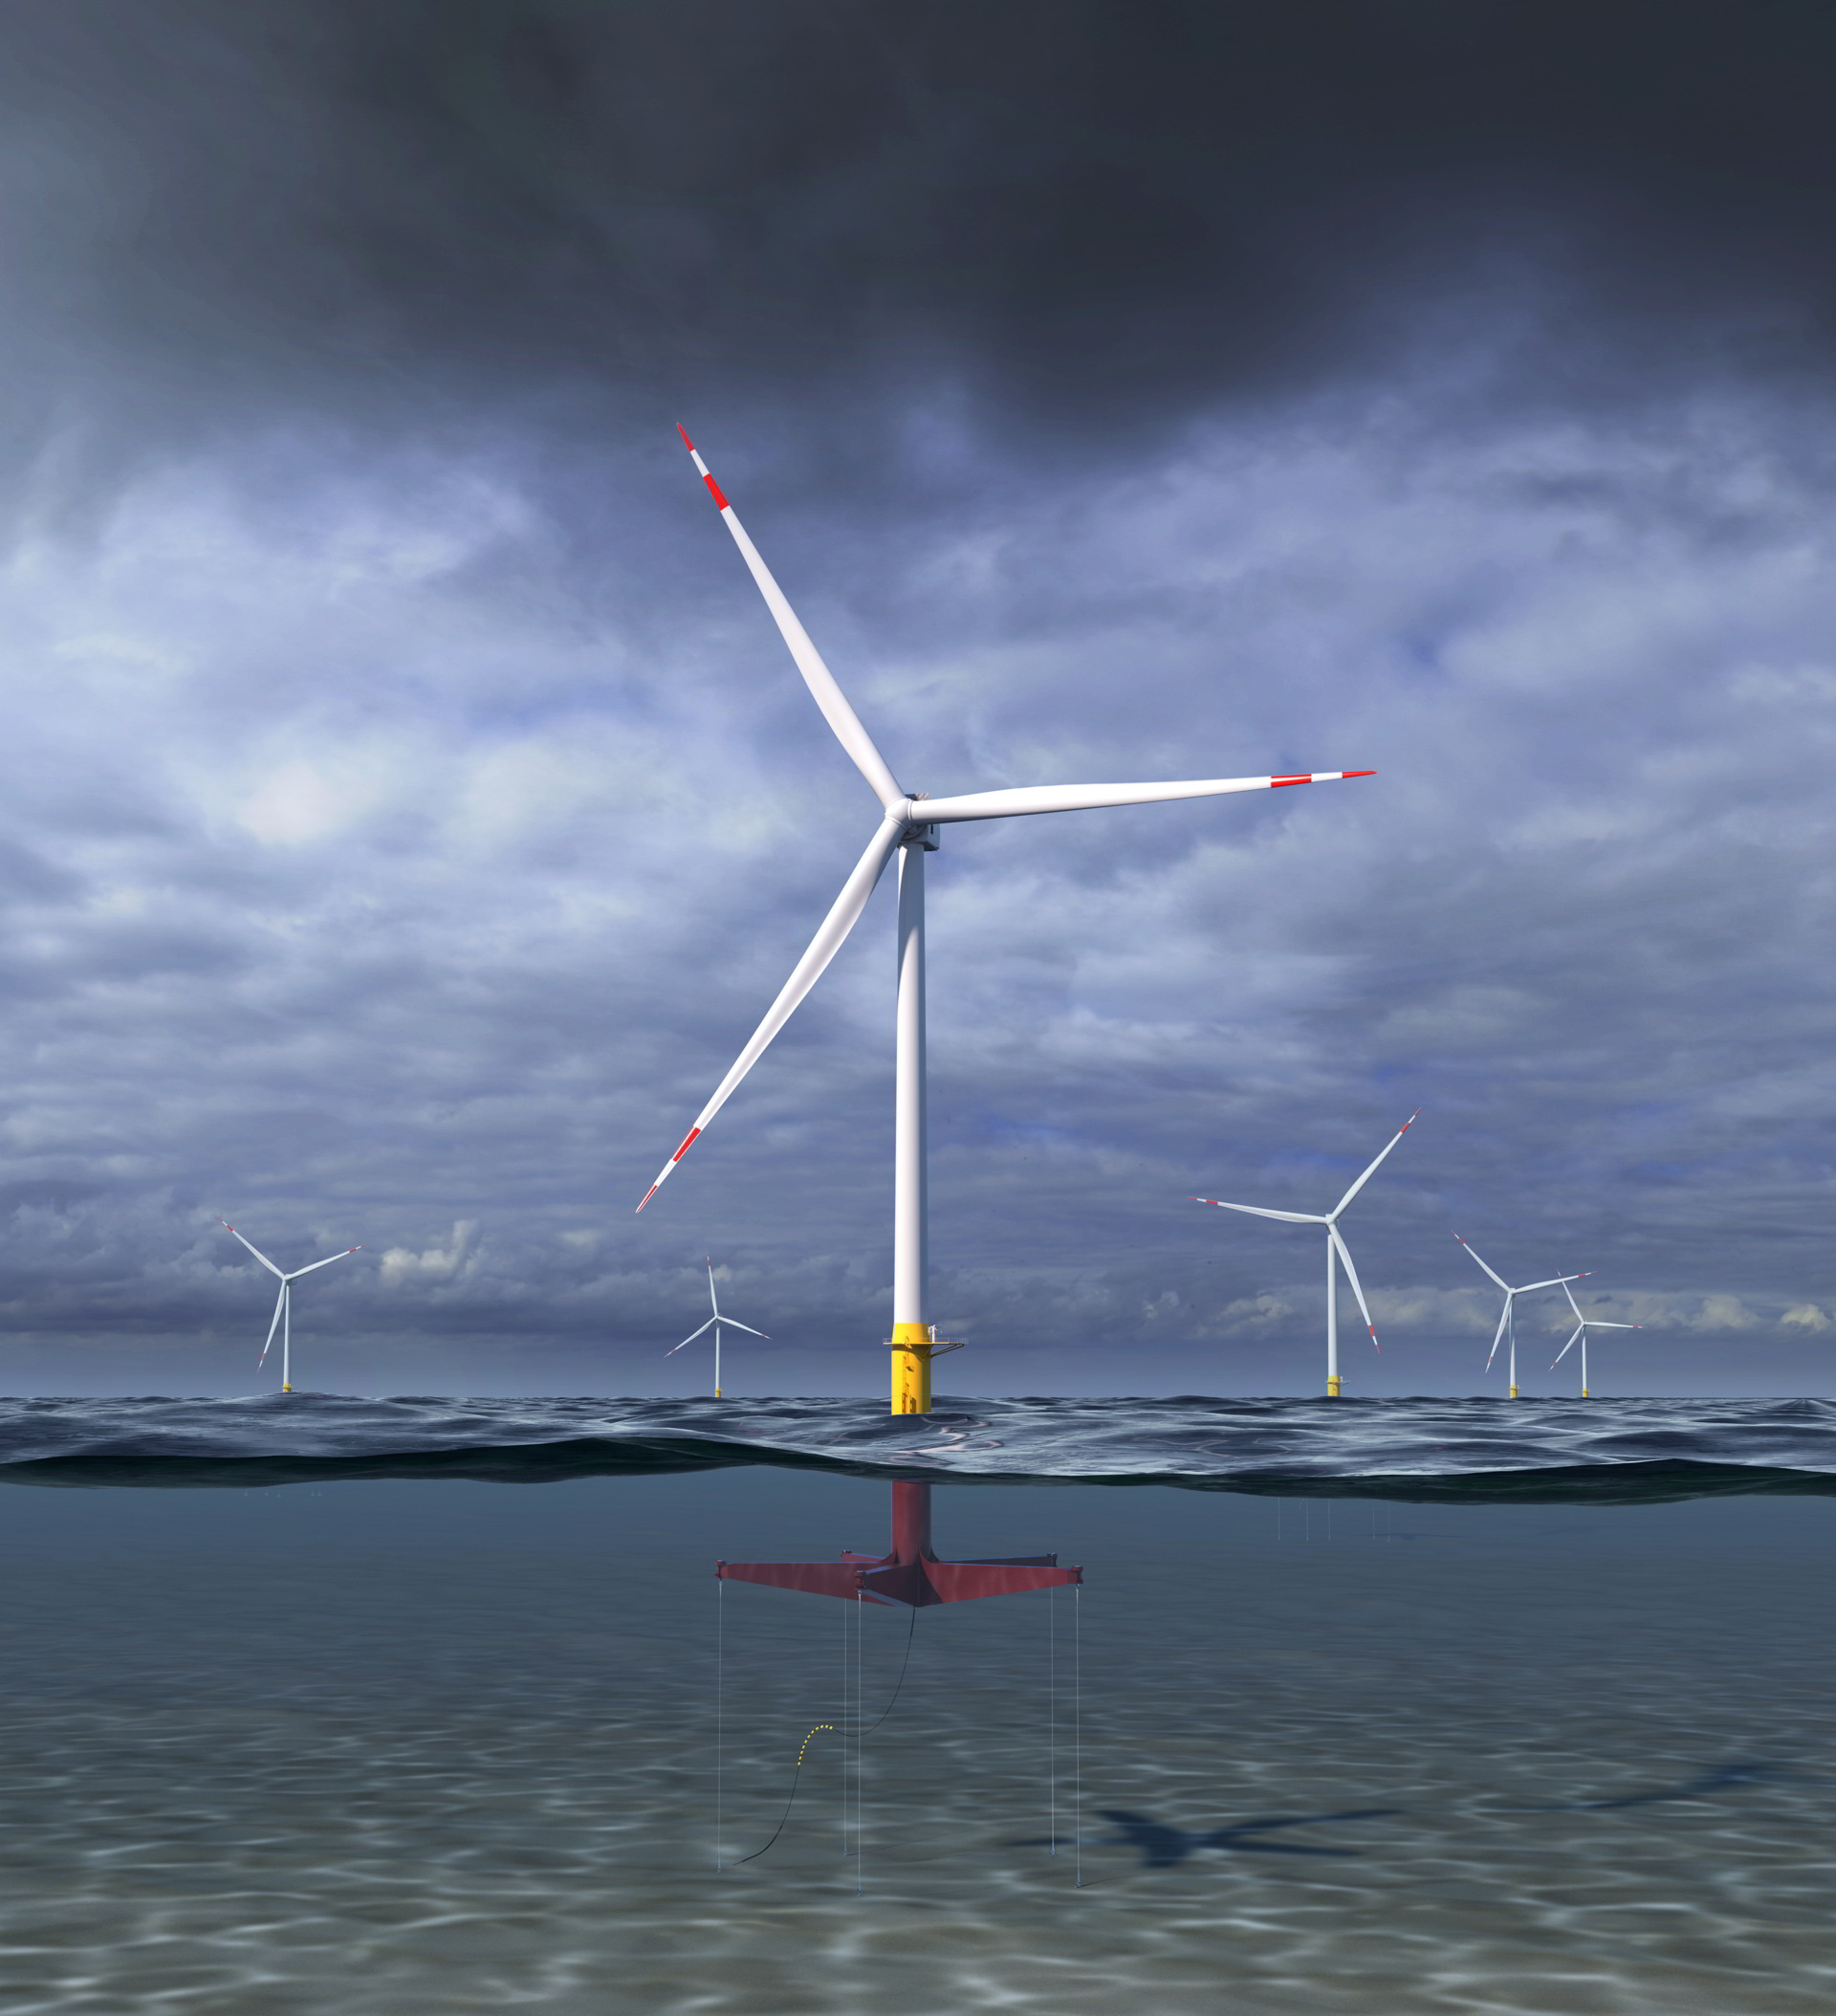 An artist's rendering of the 12 MW Floating Wind Turbine concept GE Research and Glosten